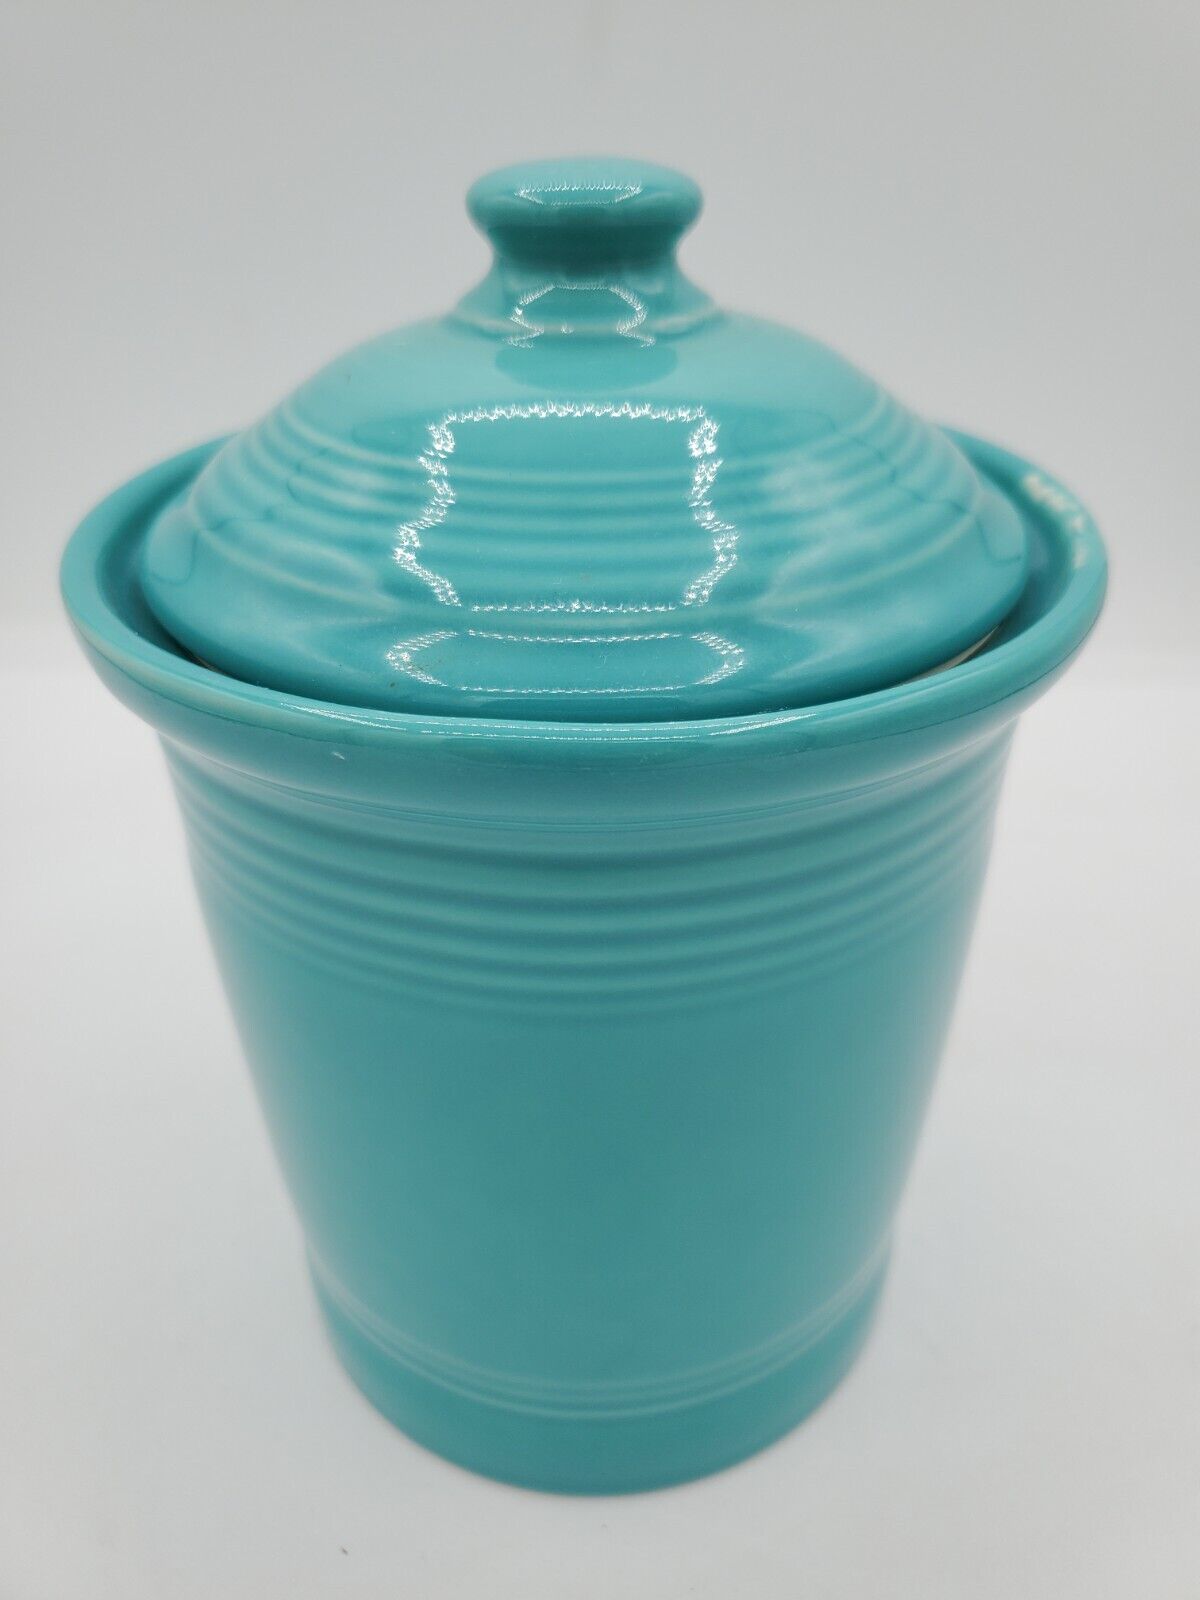 Fiestaware Fiesta Ware Canister Crock Canister Turquoise Blue - 2QT Medium 7.5\